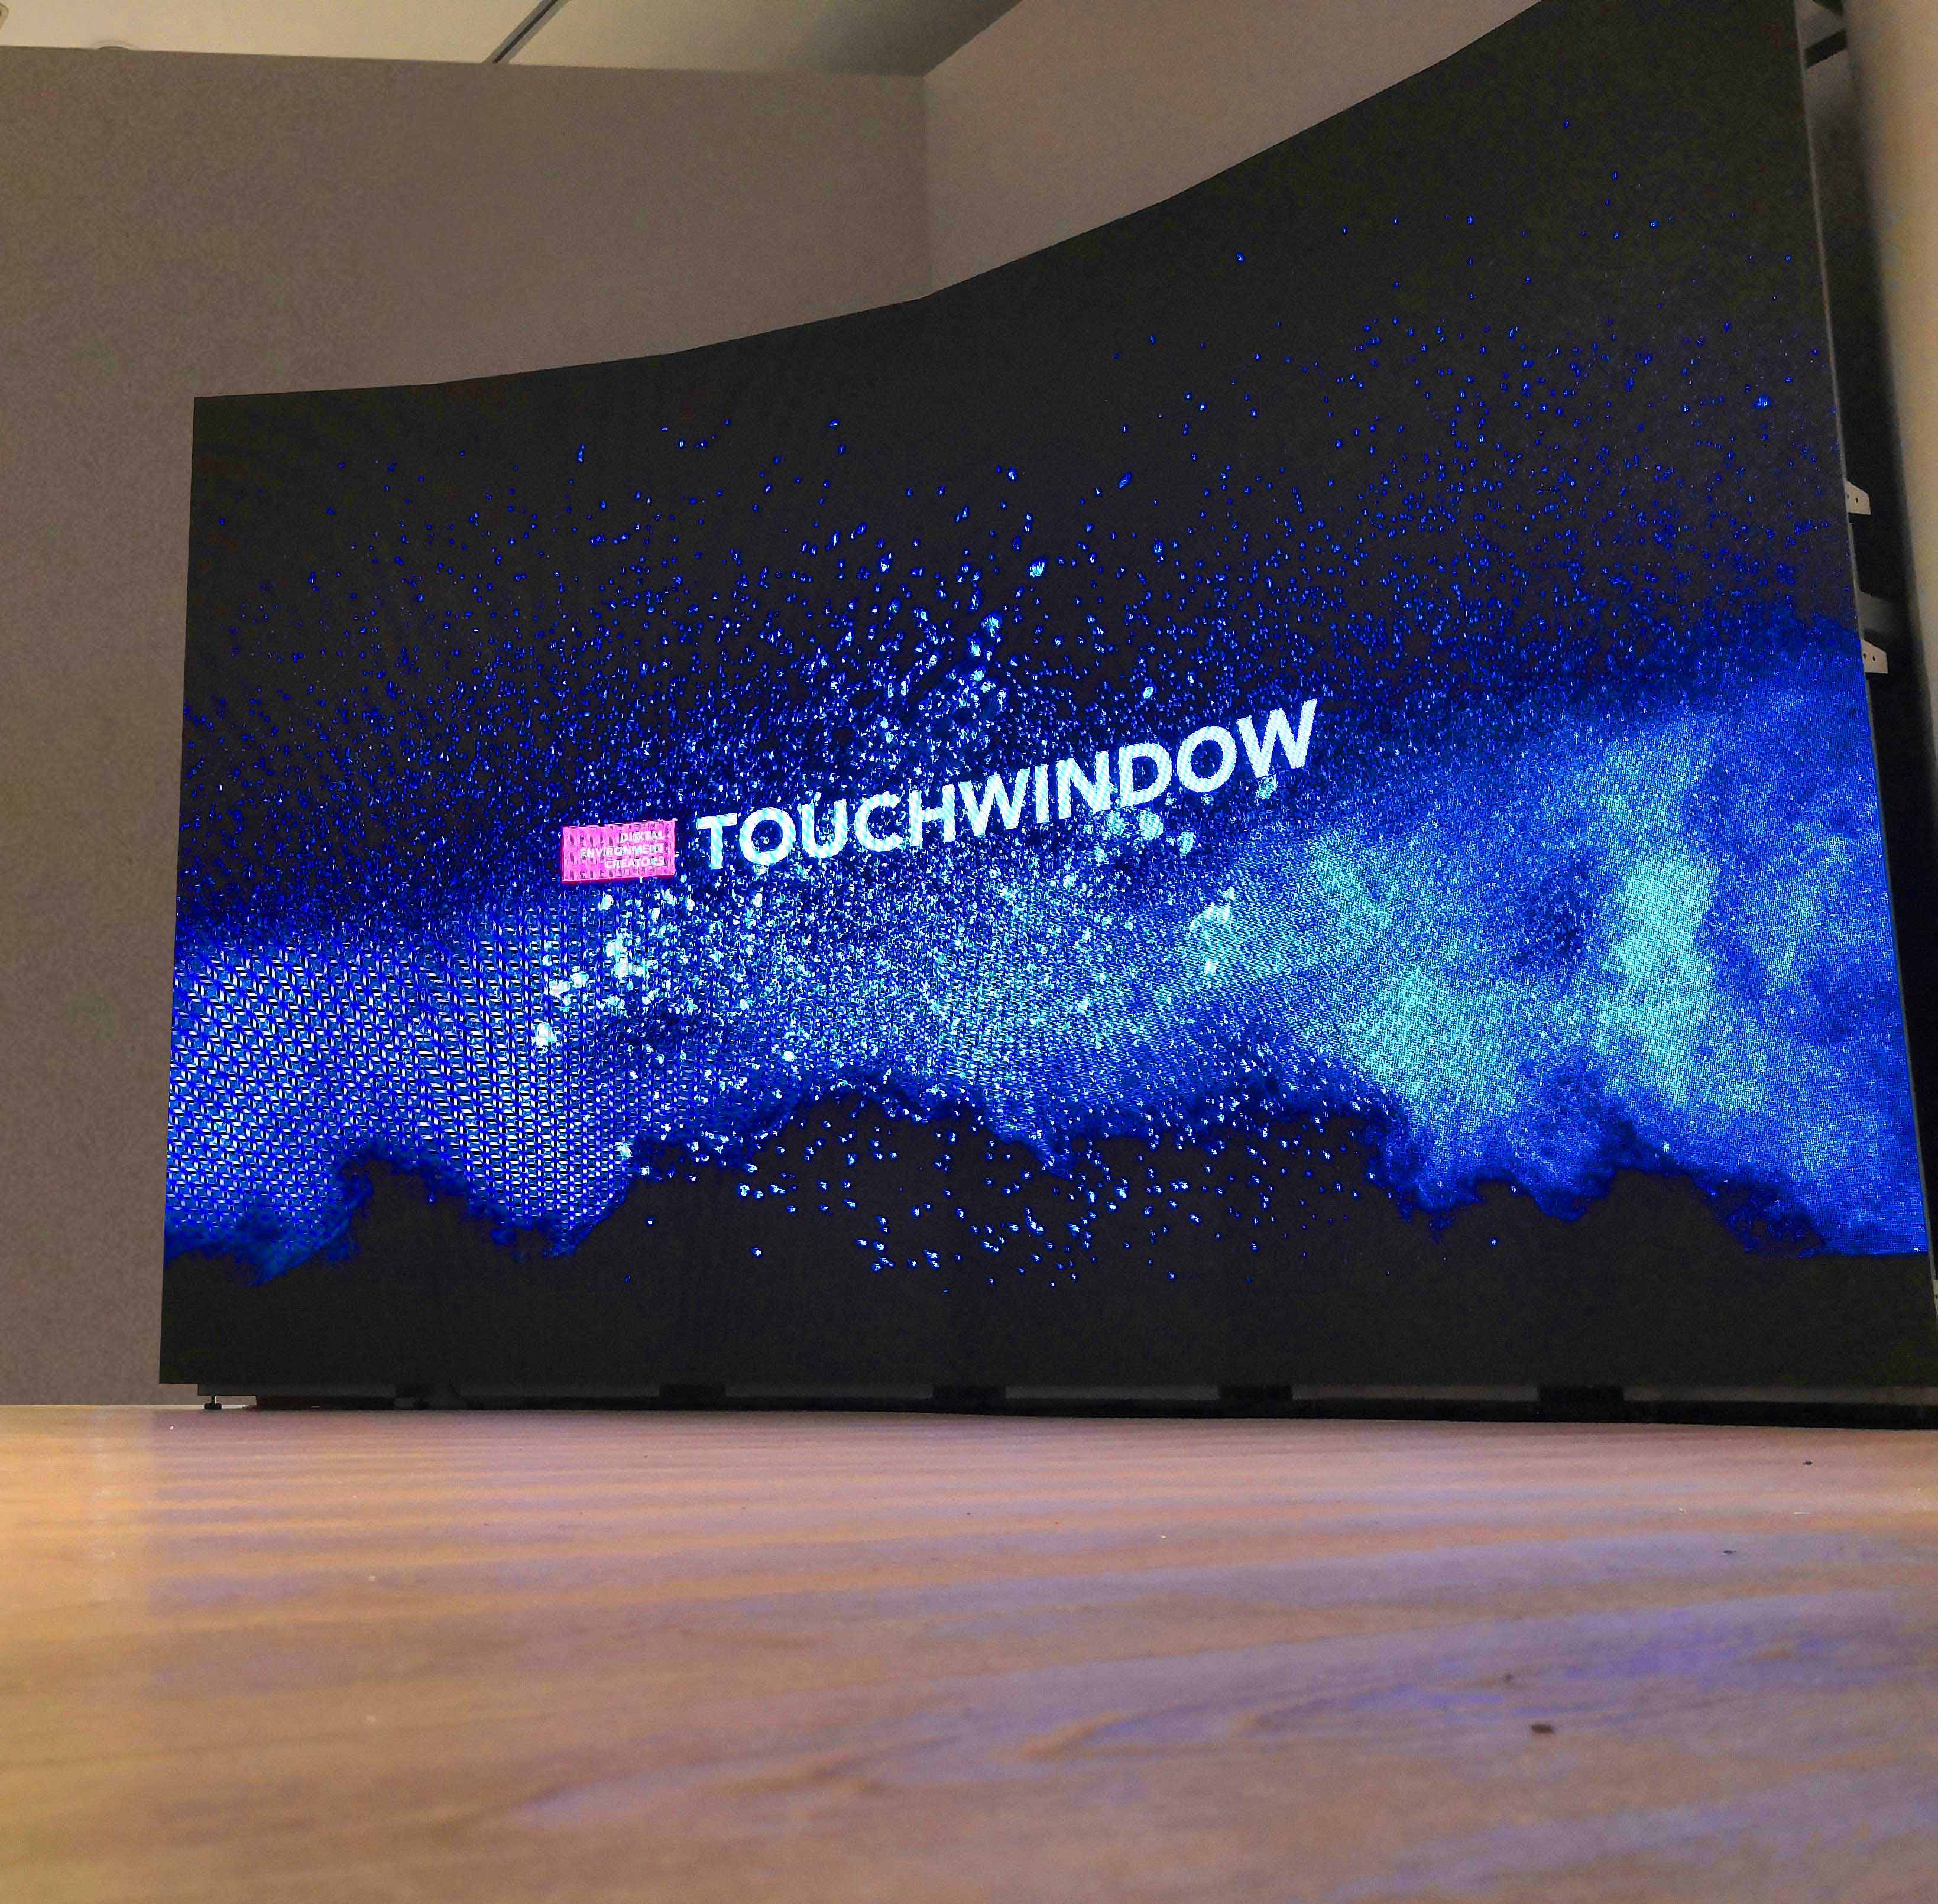 Touchwindow - Curved ledwall in 5 giorni